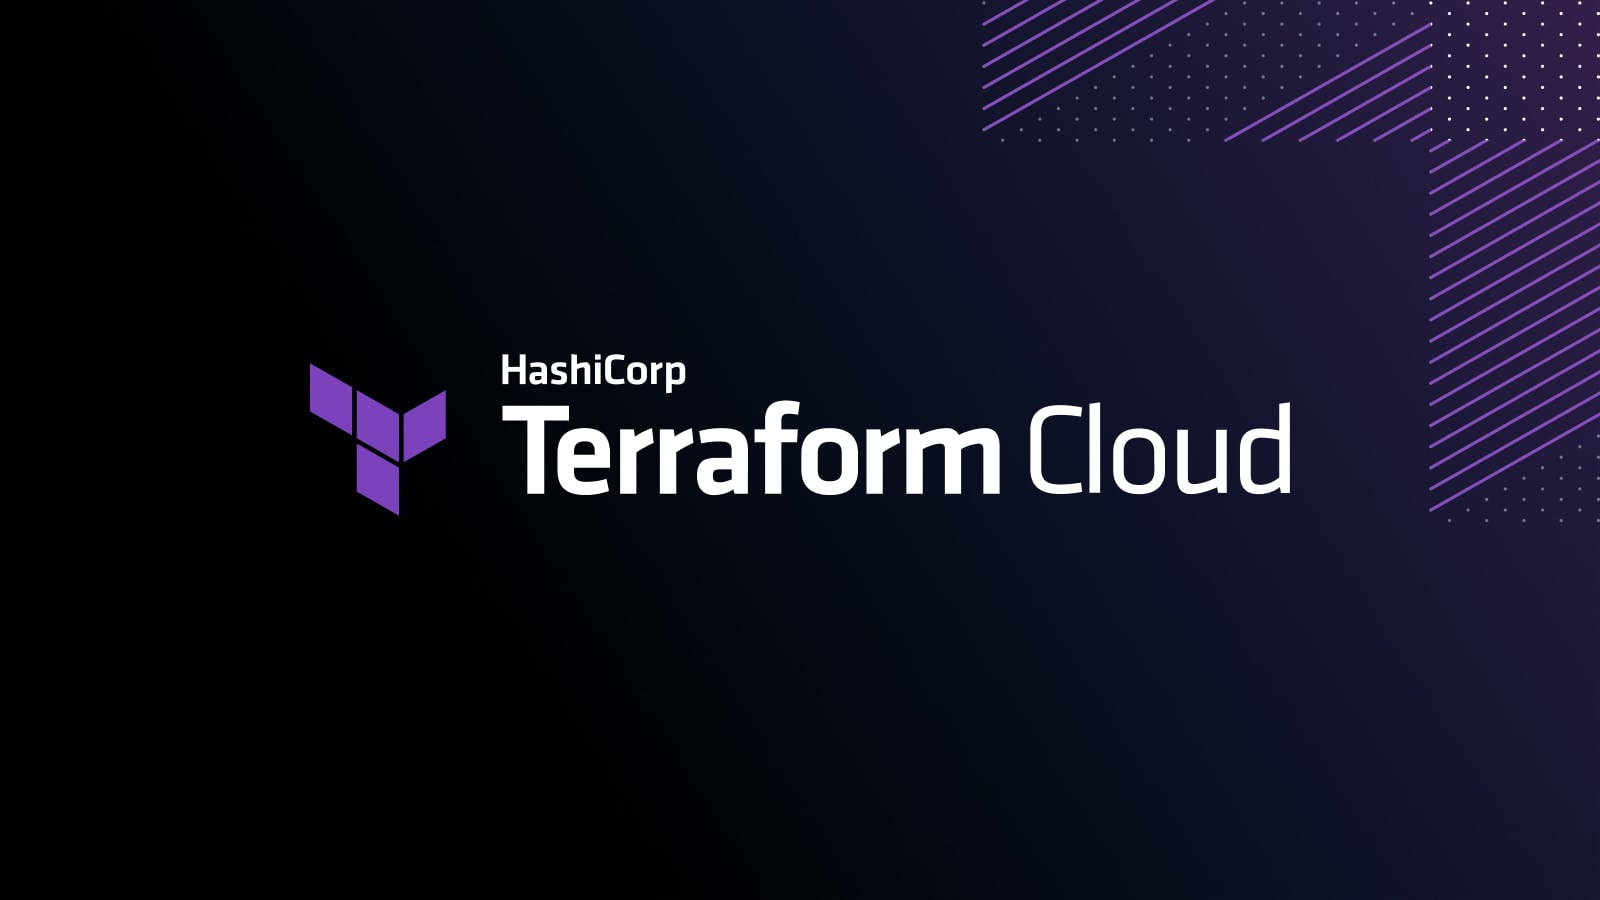 Terraform Cloud now supports multiple configurations for dynamic provider credentials